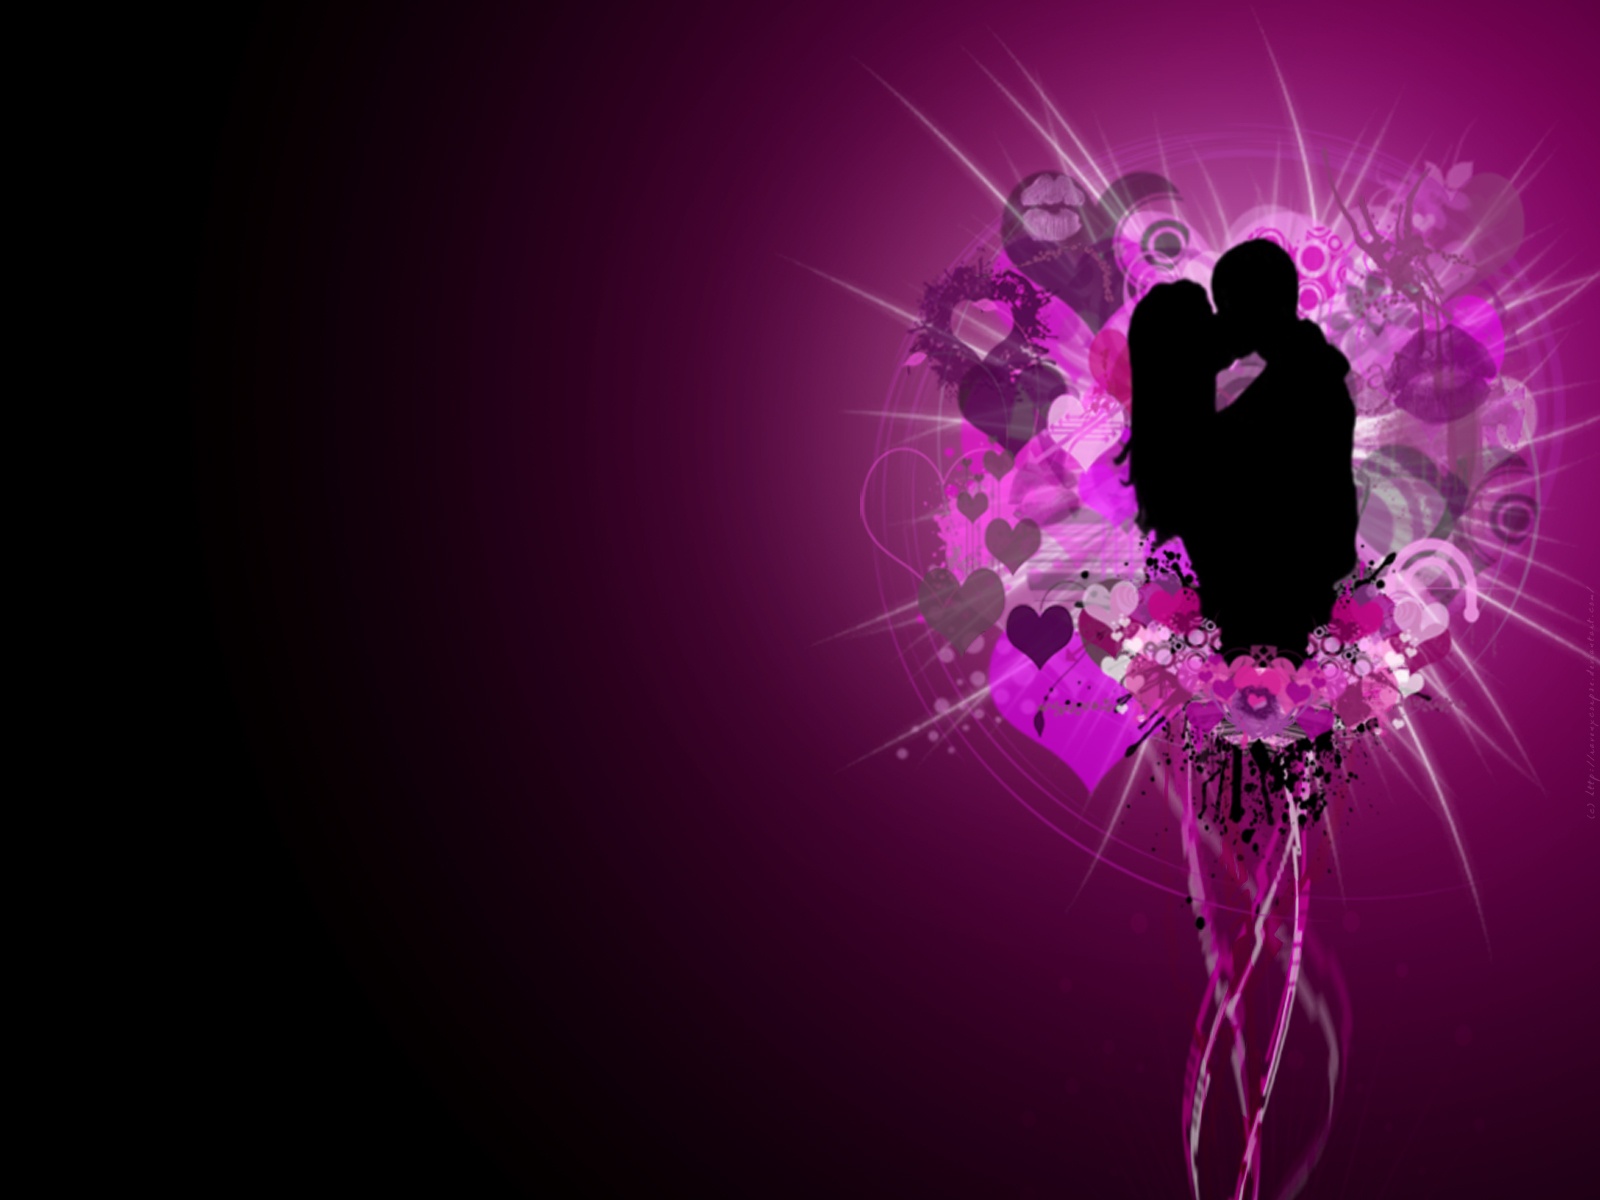 Romantic Wallpapers Kiss HD A27 - Free Romantic Wallpapers, Romantic Couples, Romantic Love Wallpapers, Romantic Kiss Wallpapers, high definition desktop laptop mobile background Pictures images downloads.